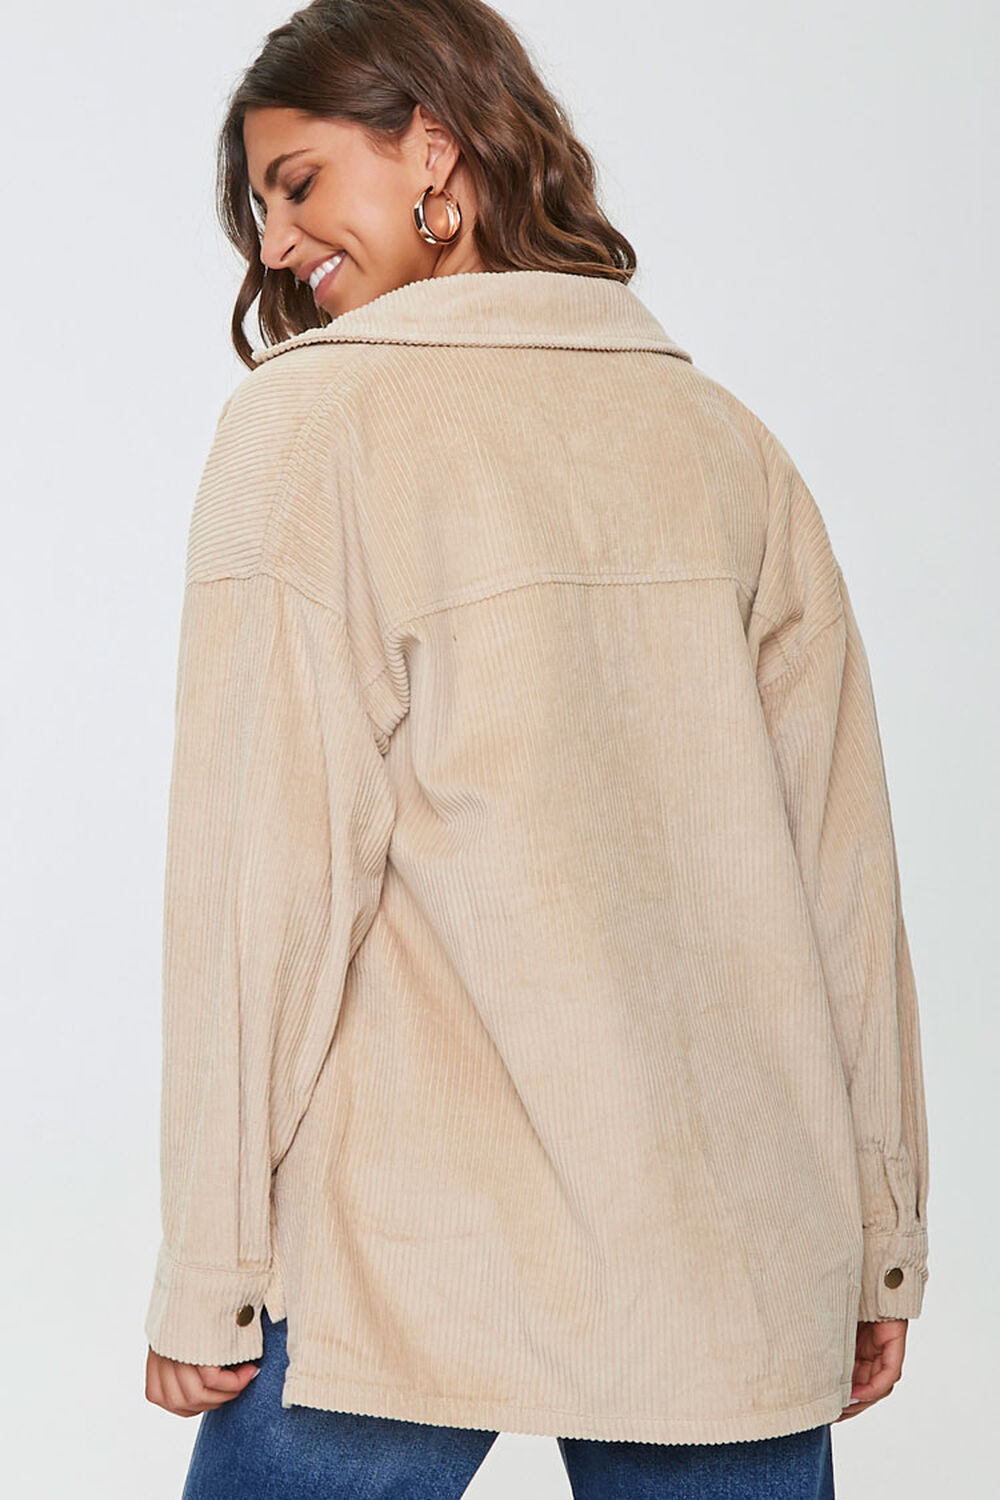 TAUPE Corduroy Snap-Button Jacket, image 3